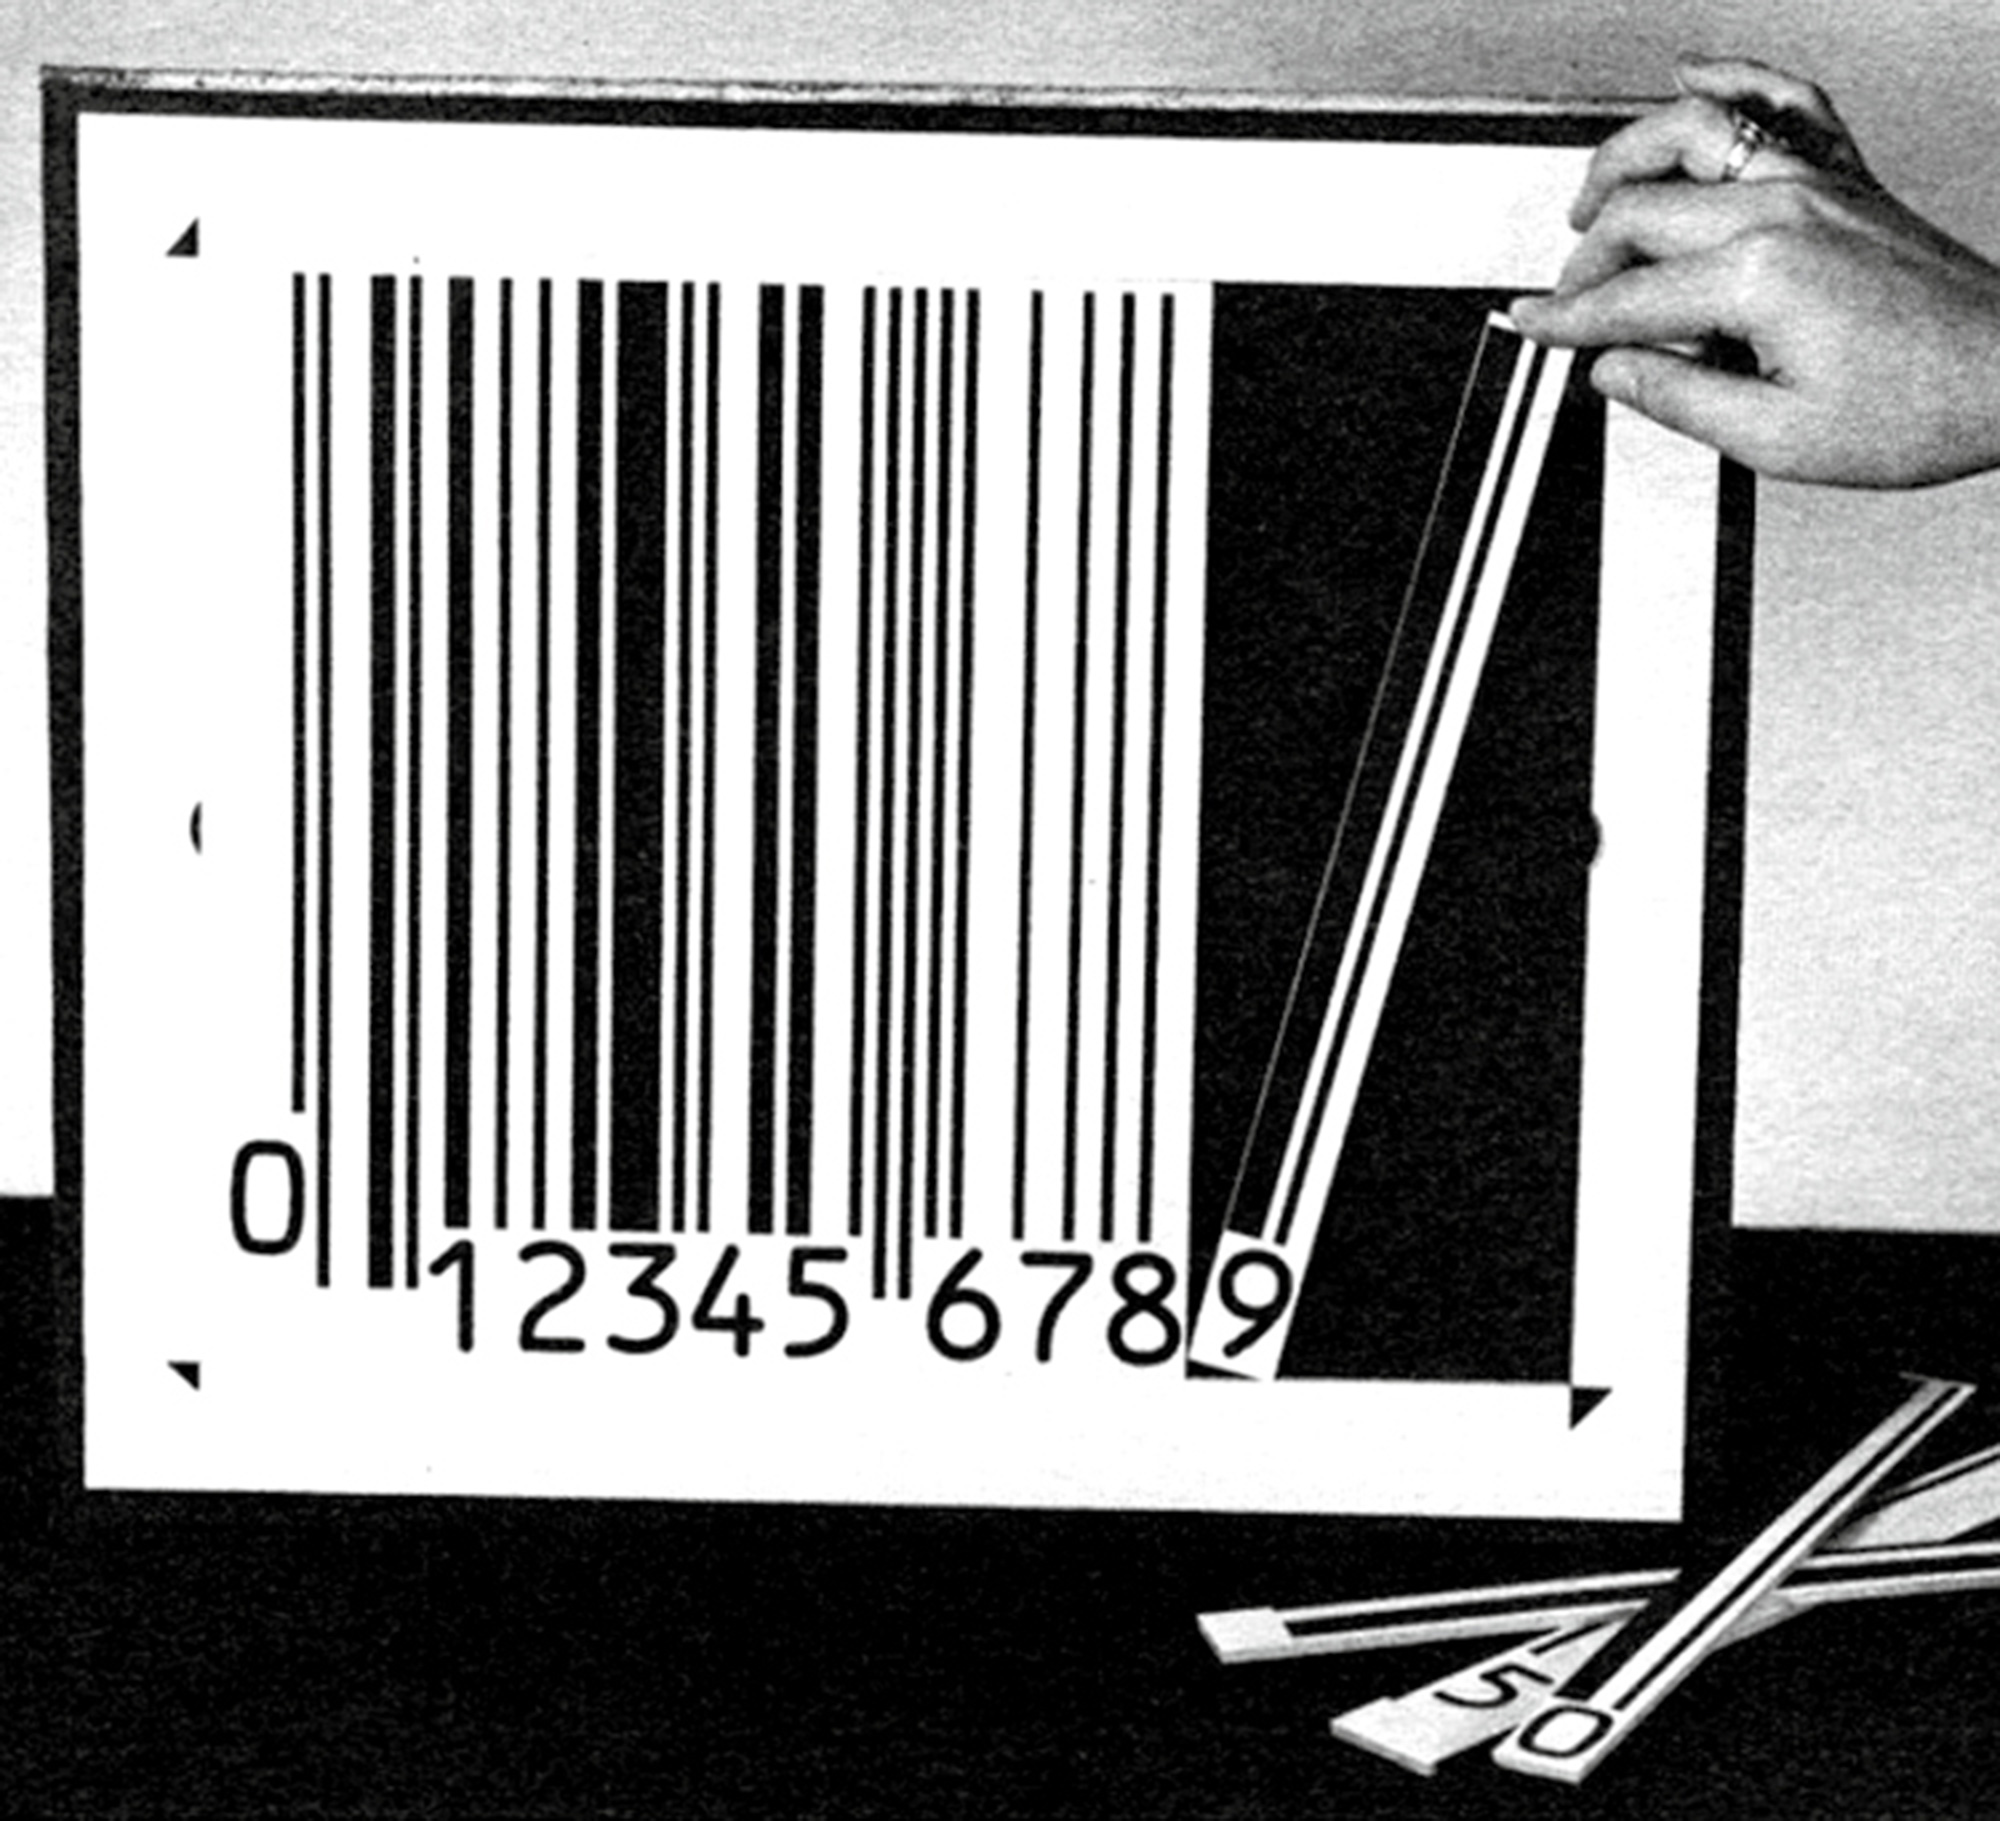 Preparing to photograph a sample Universal Product Code, ca. 1973.